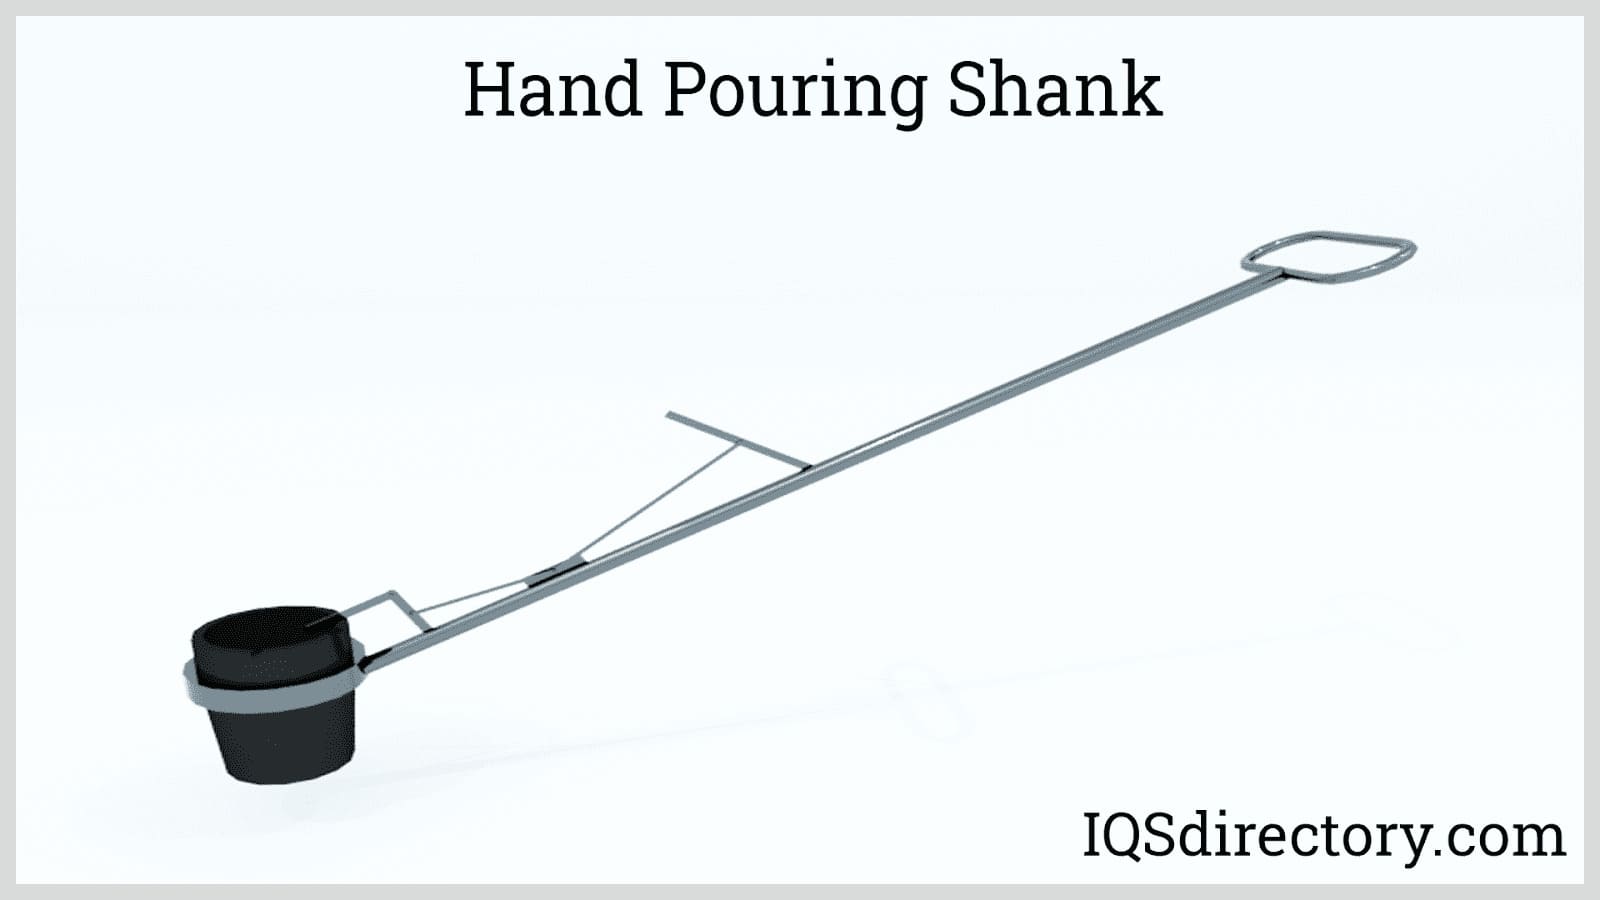 Hand Pouring Shank